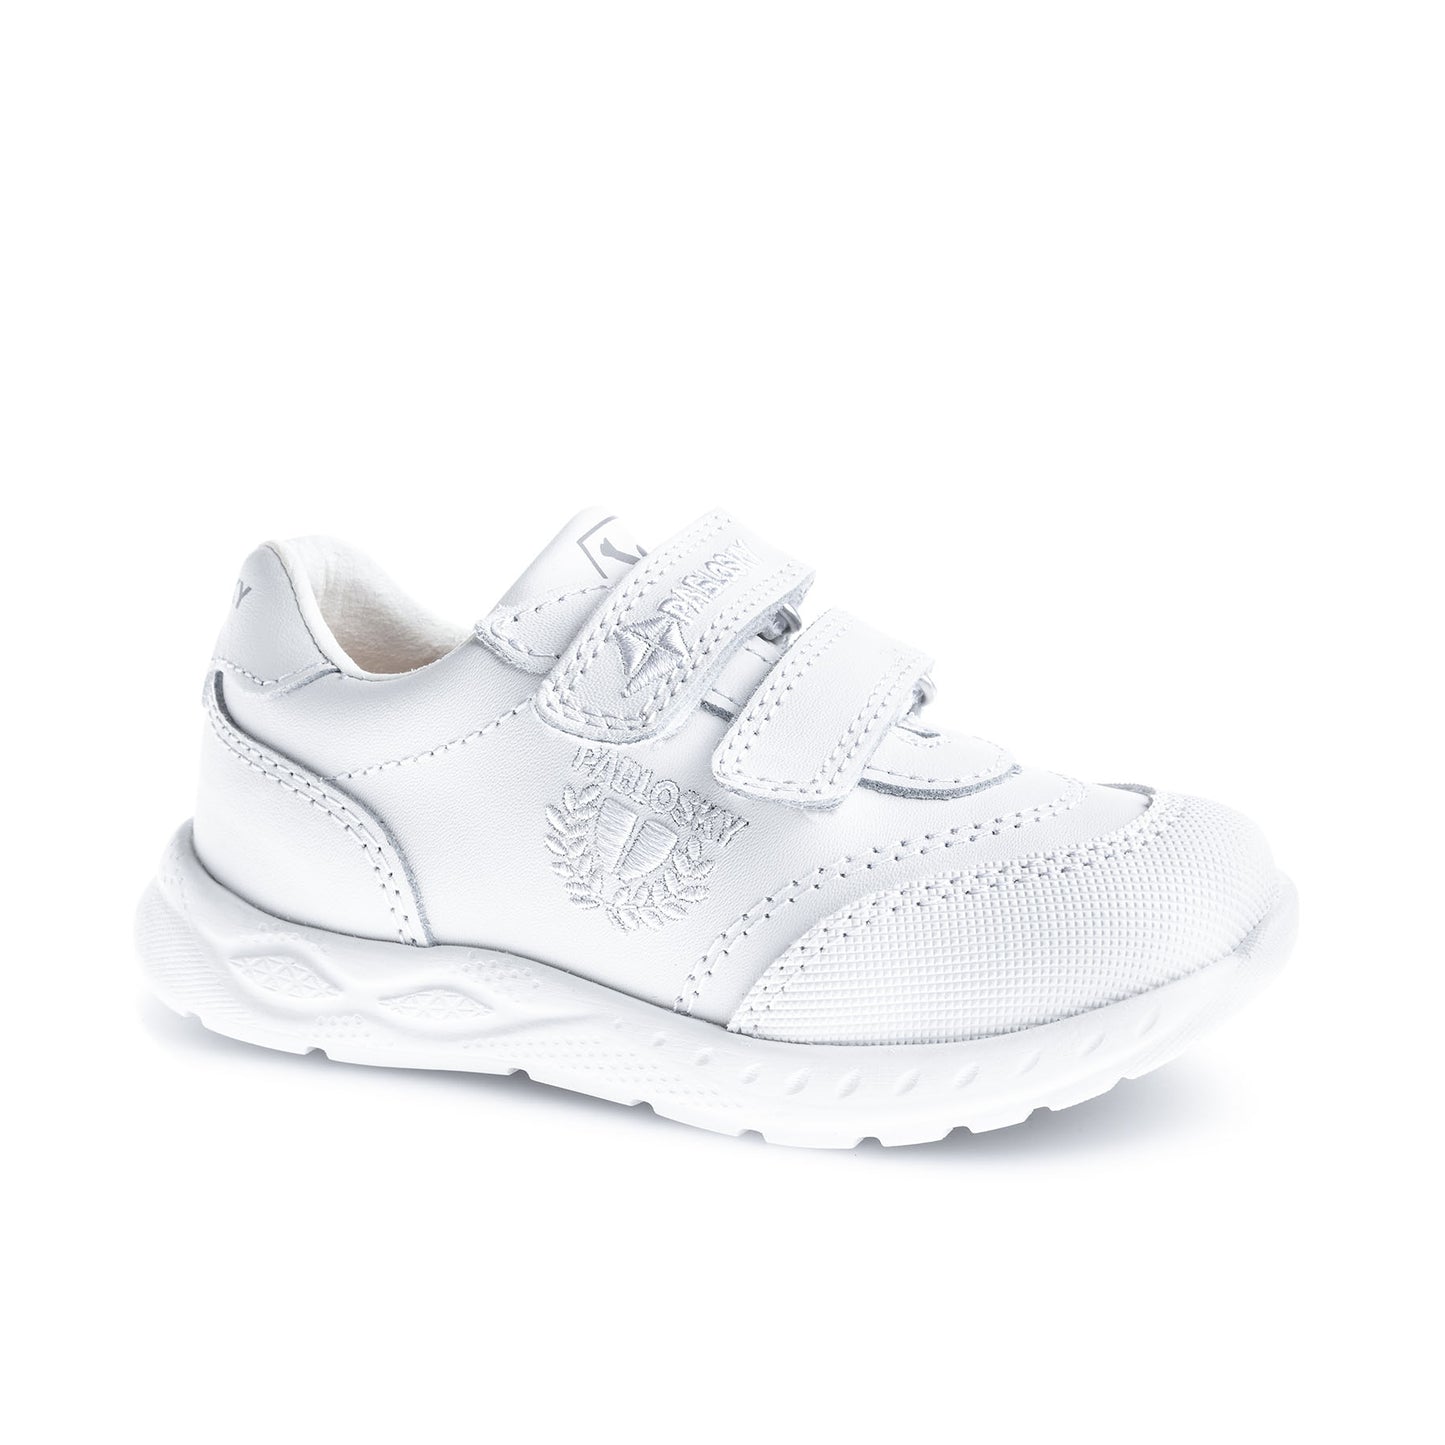 Pablosky White School Shoes / 296900